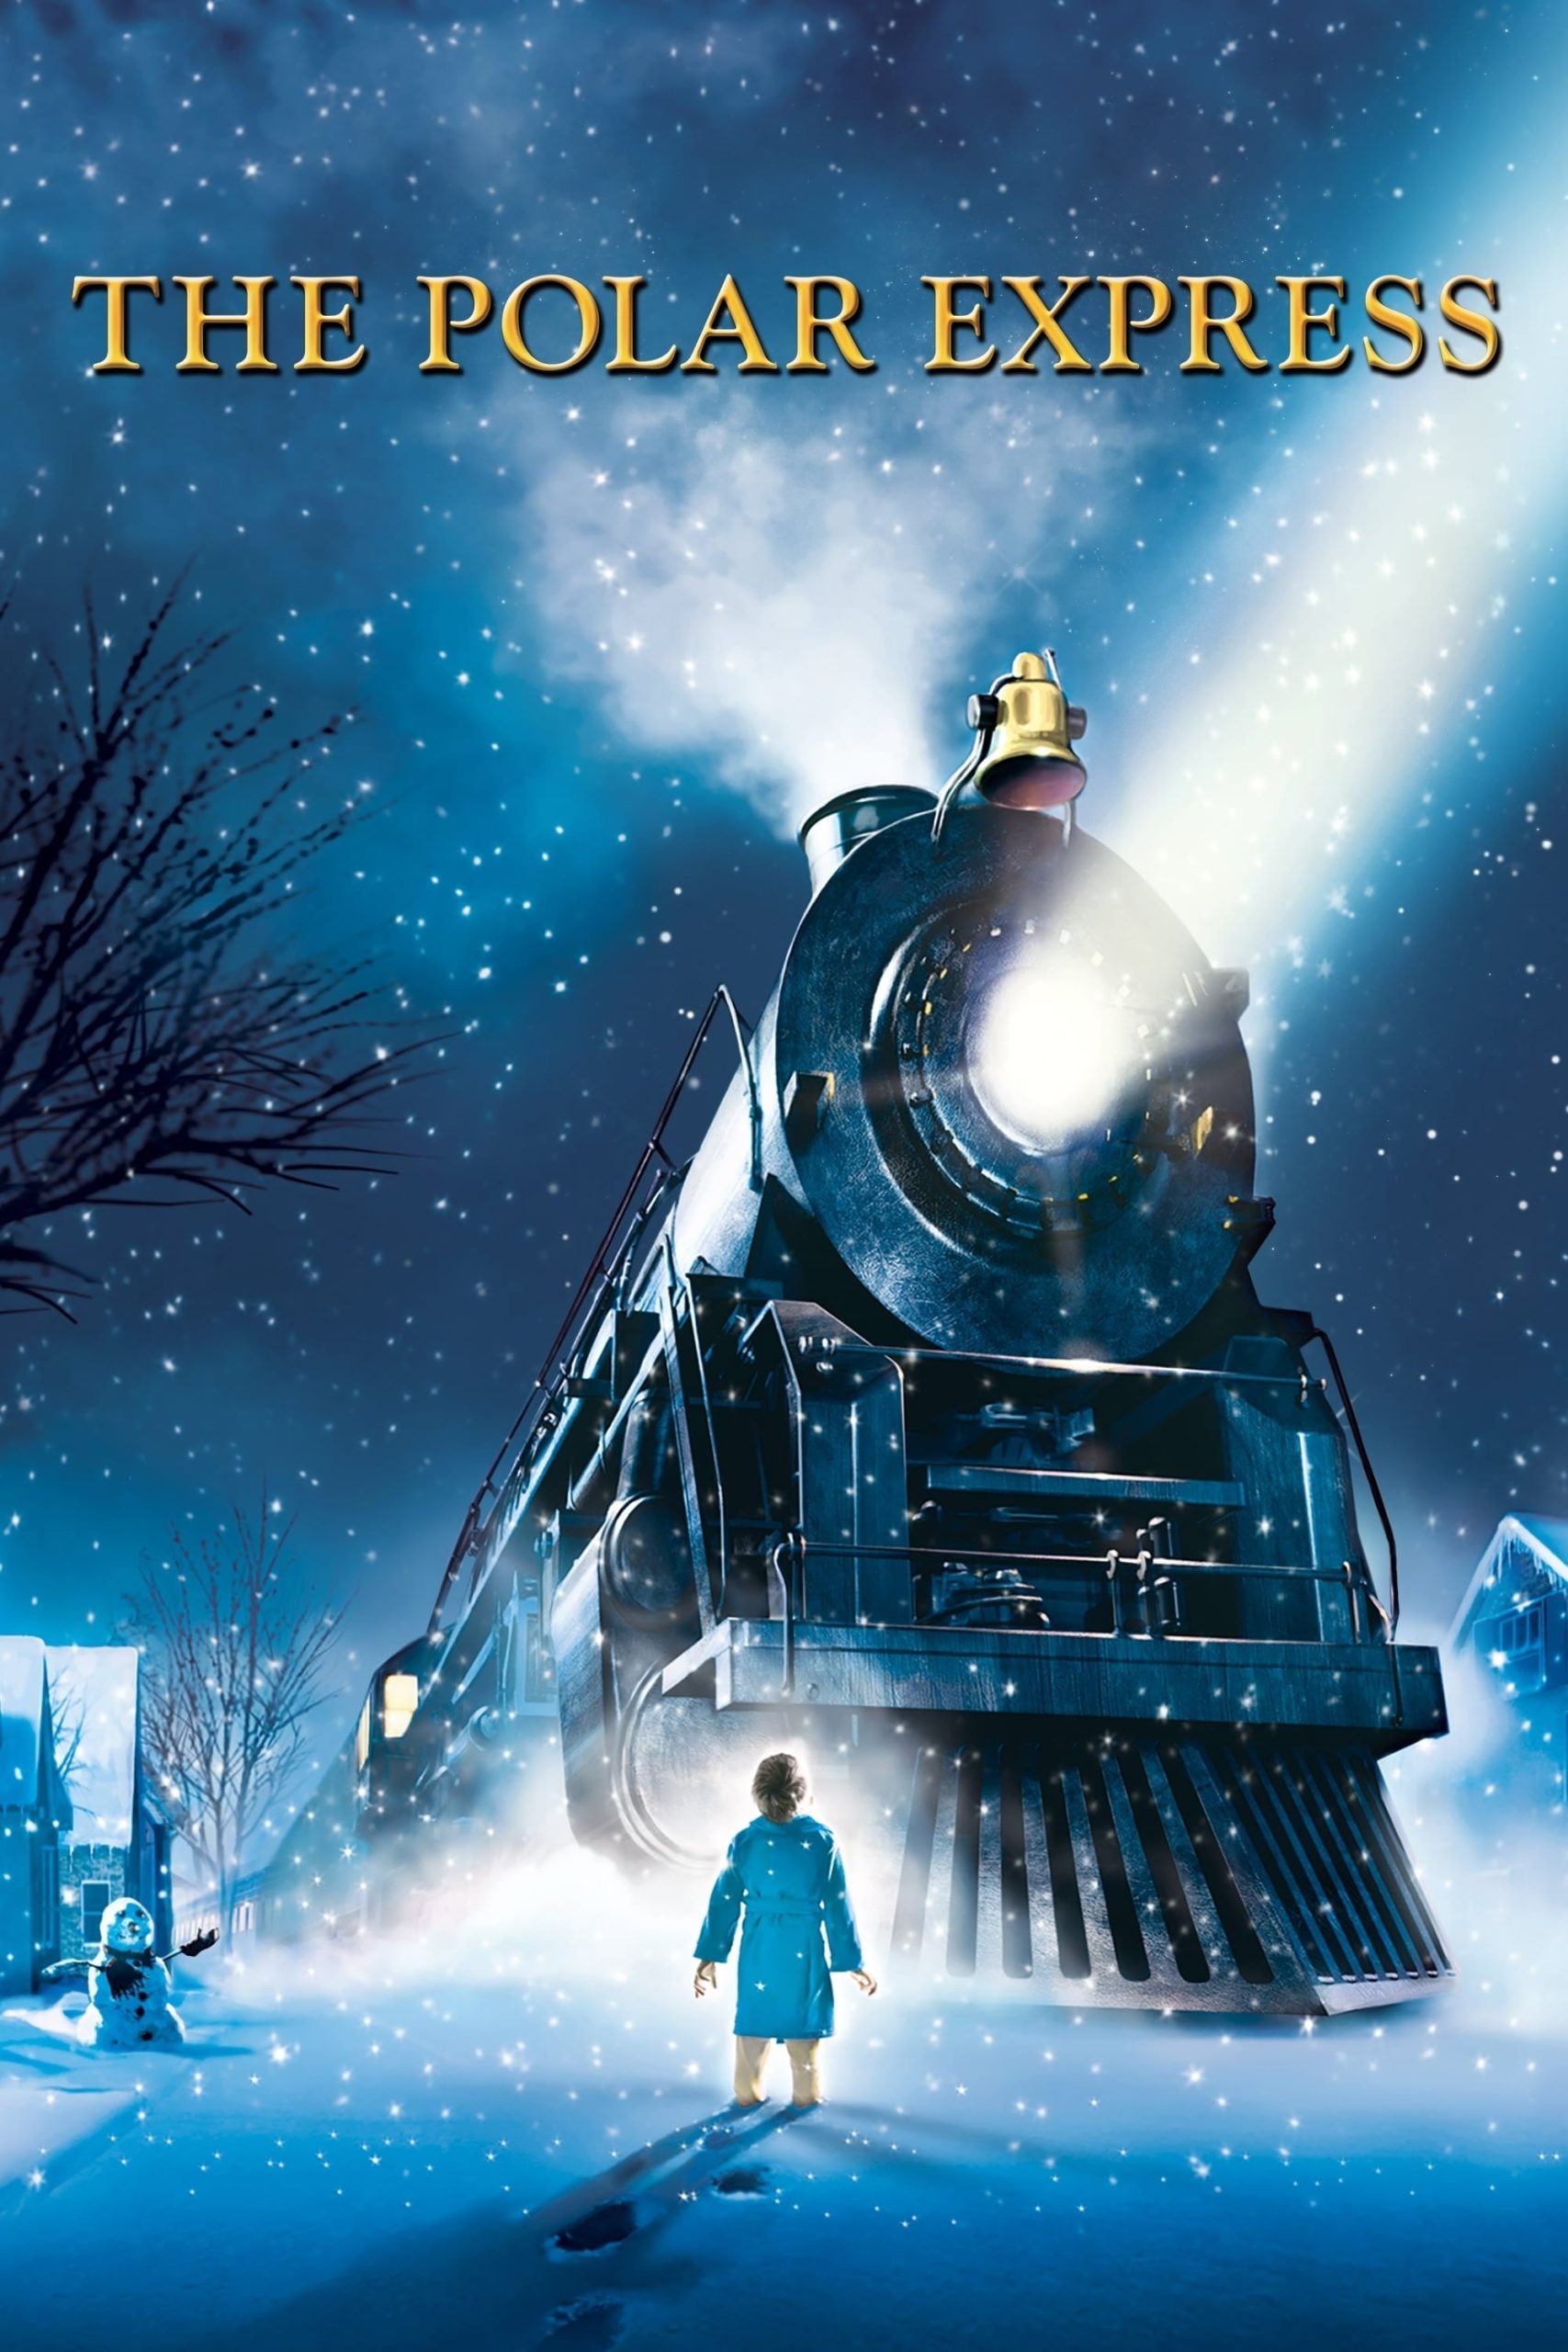 Event Holidays at the Tropic: The Polar Express